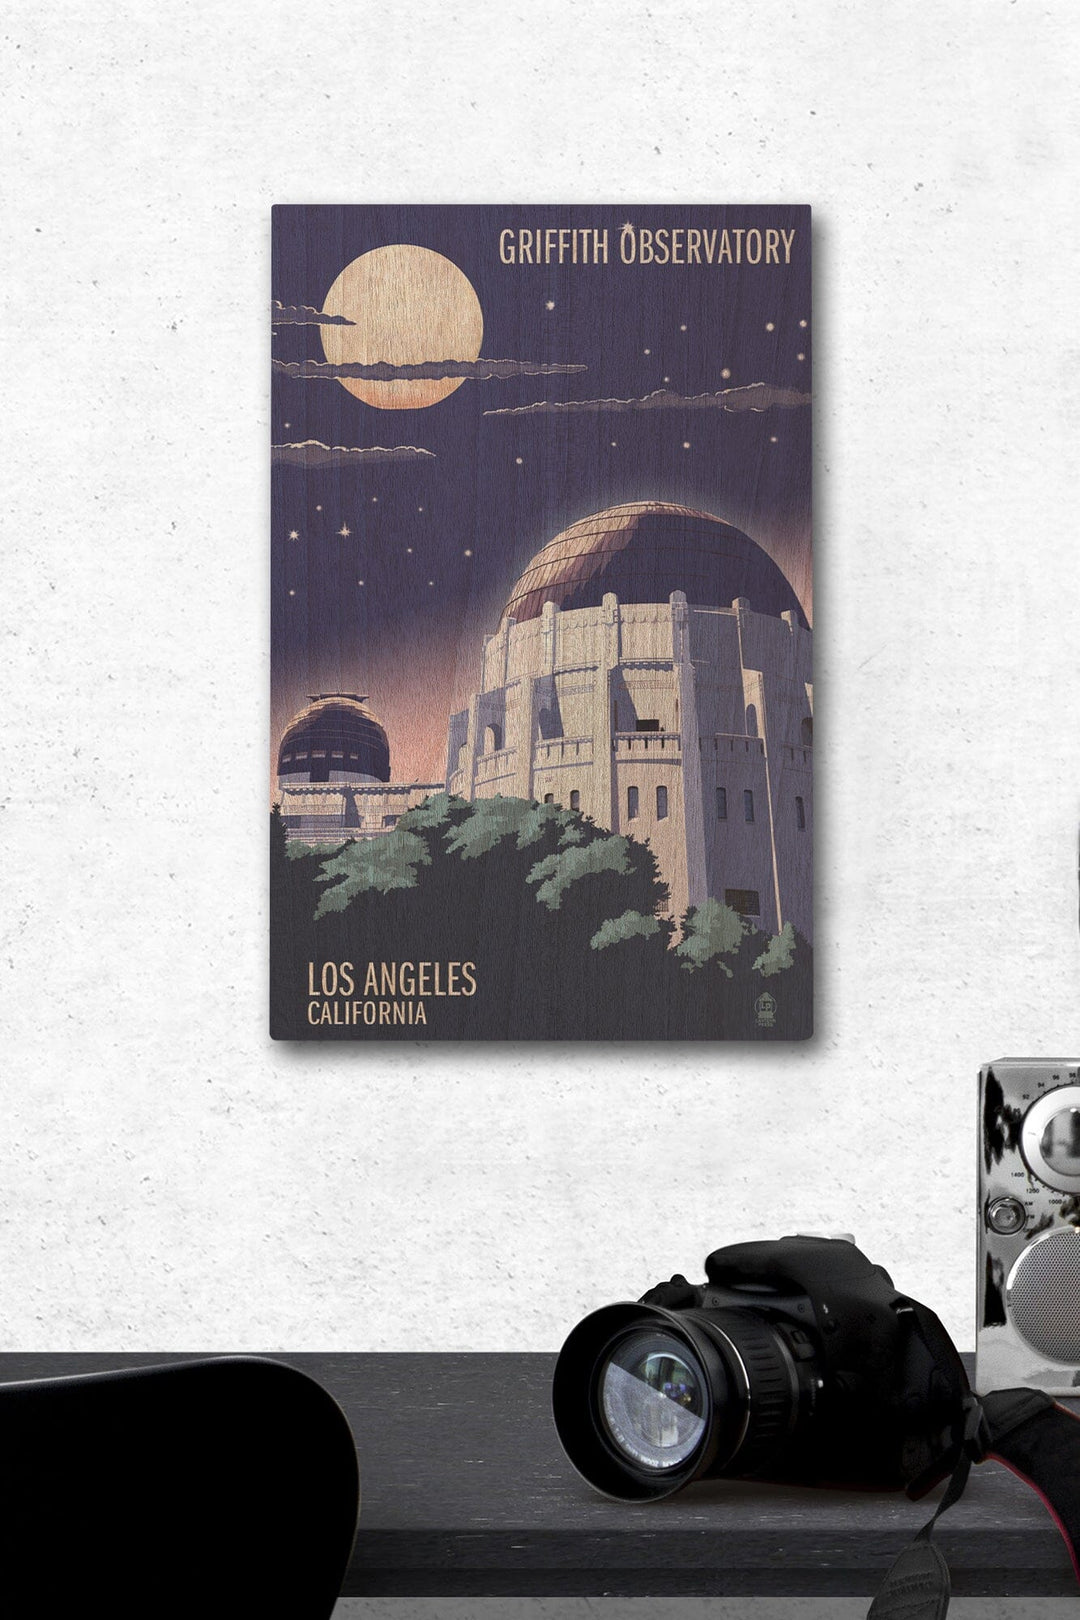 Los Angeles, California, Griffith Observatory at Night, Lantern Press Artwork, Wood Signs and Postcards Wood Lantern Press 12 x 18 Wood Gallery Print 